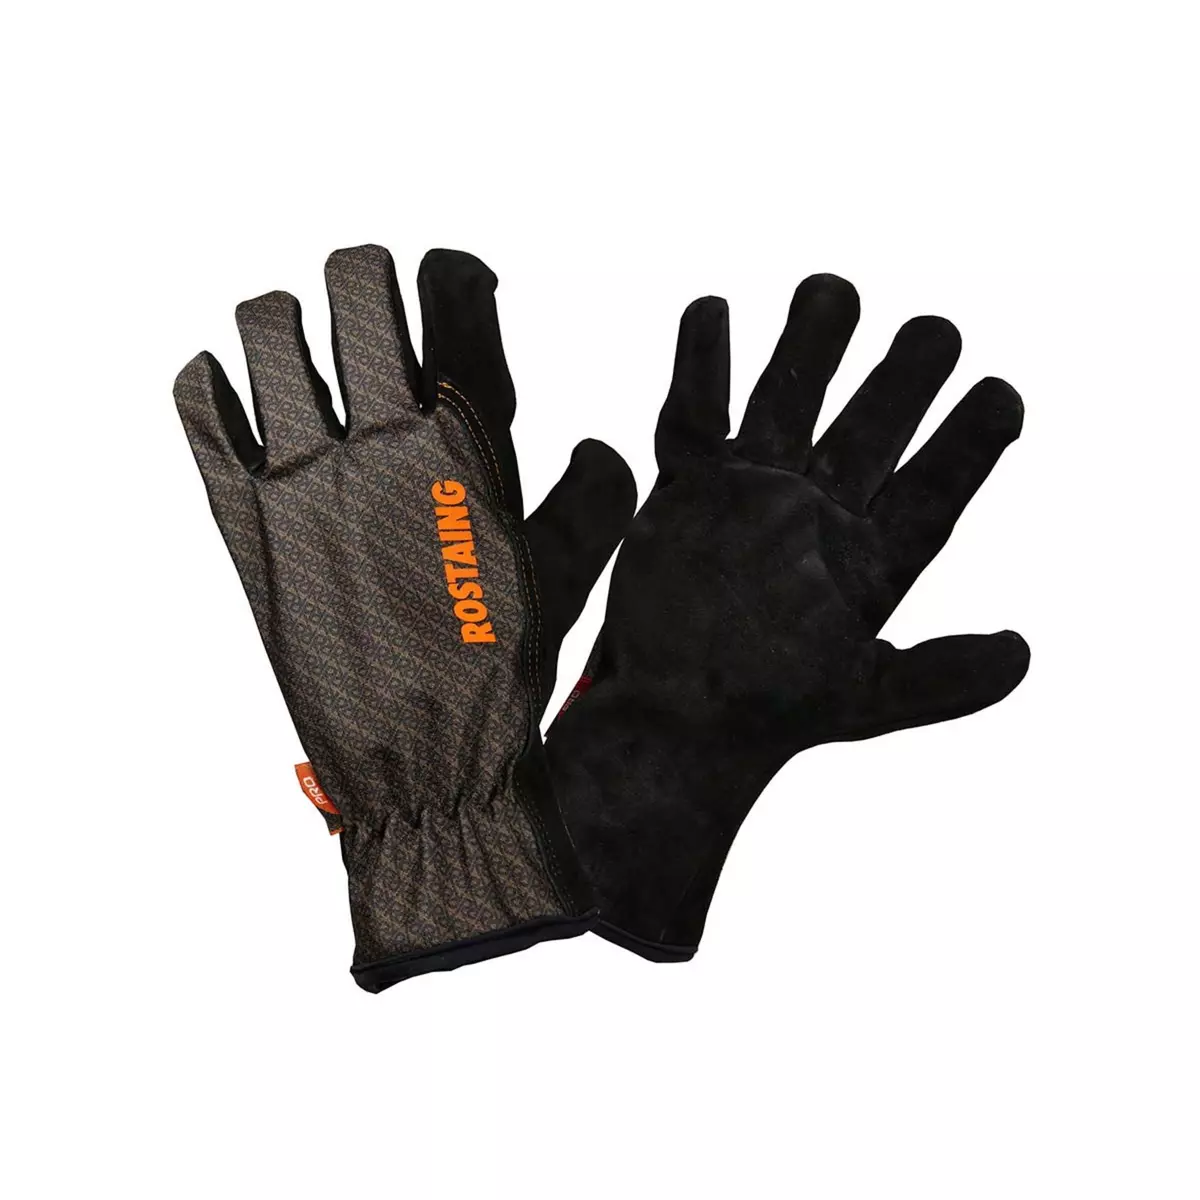 ROSTAING Gants de protection pour gros travaux Taille 8 - Rostaing